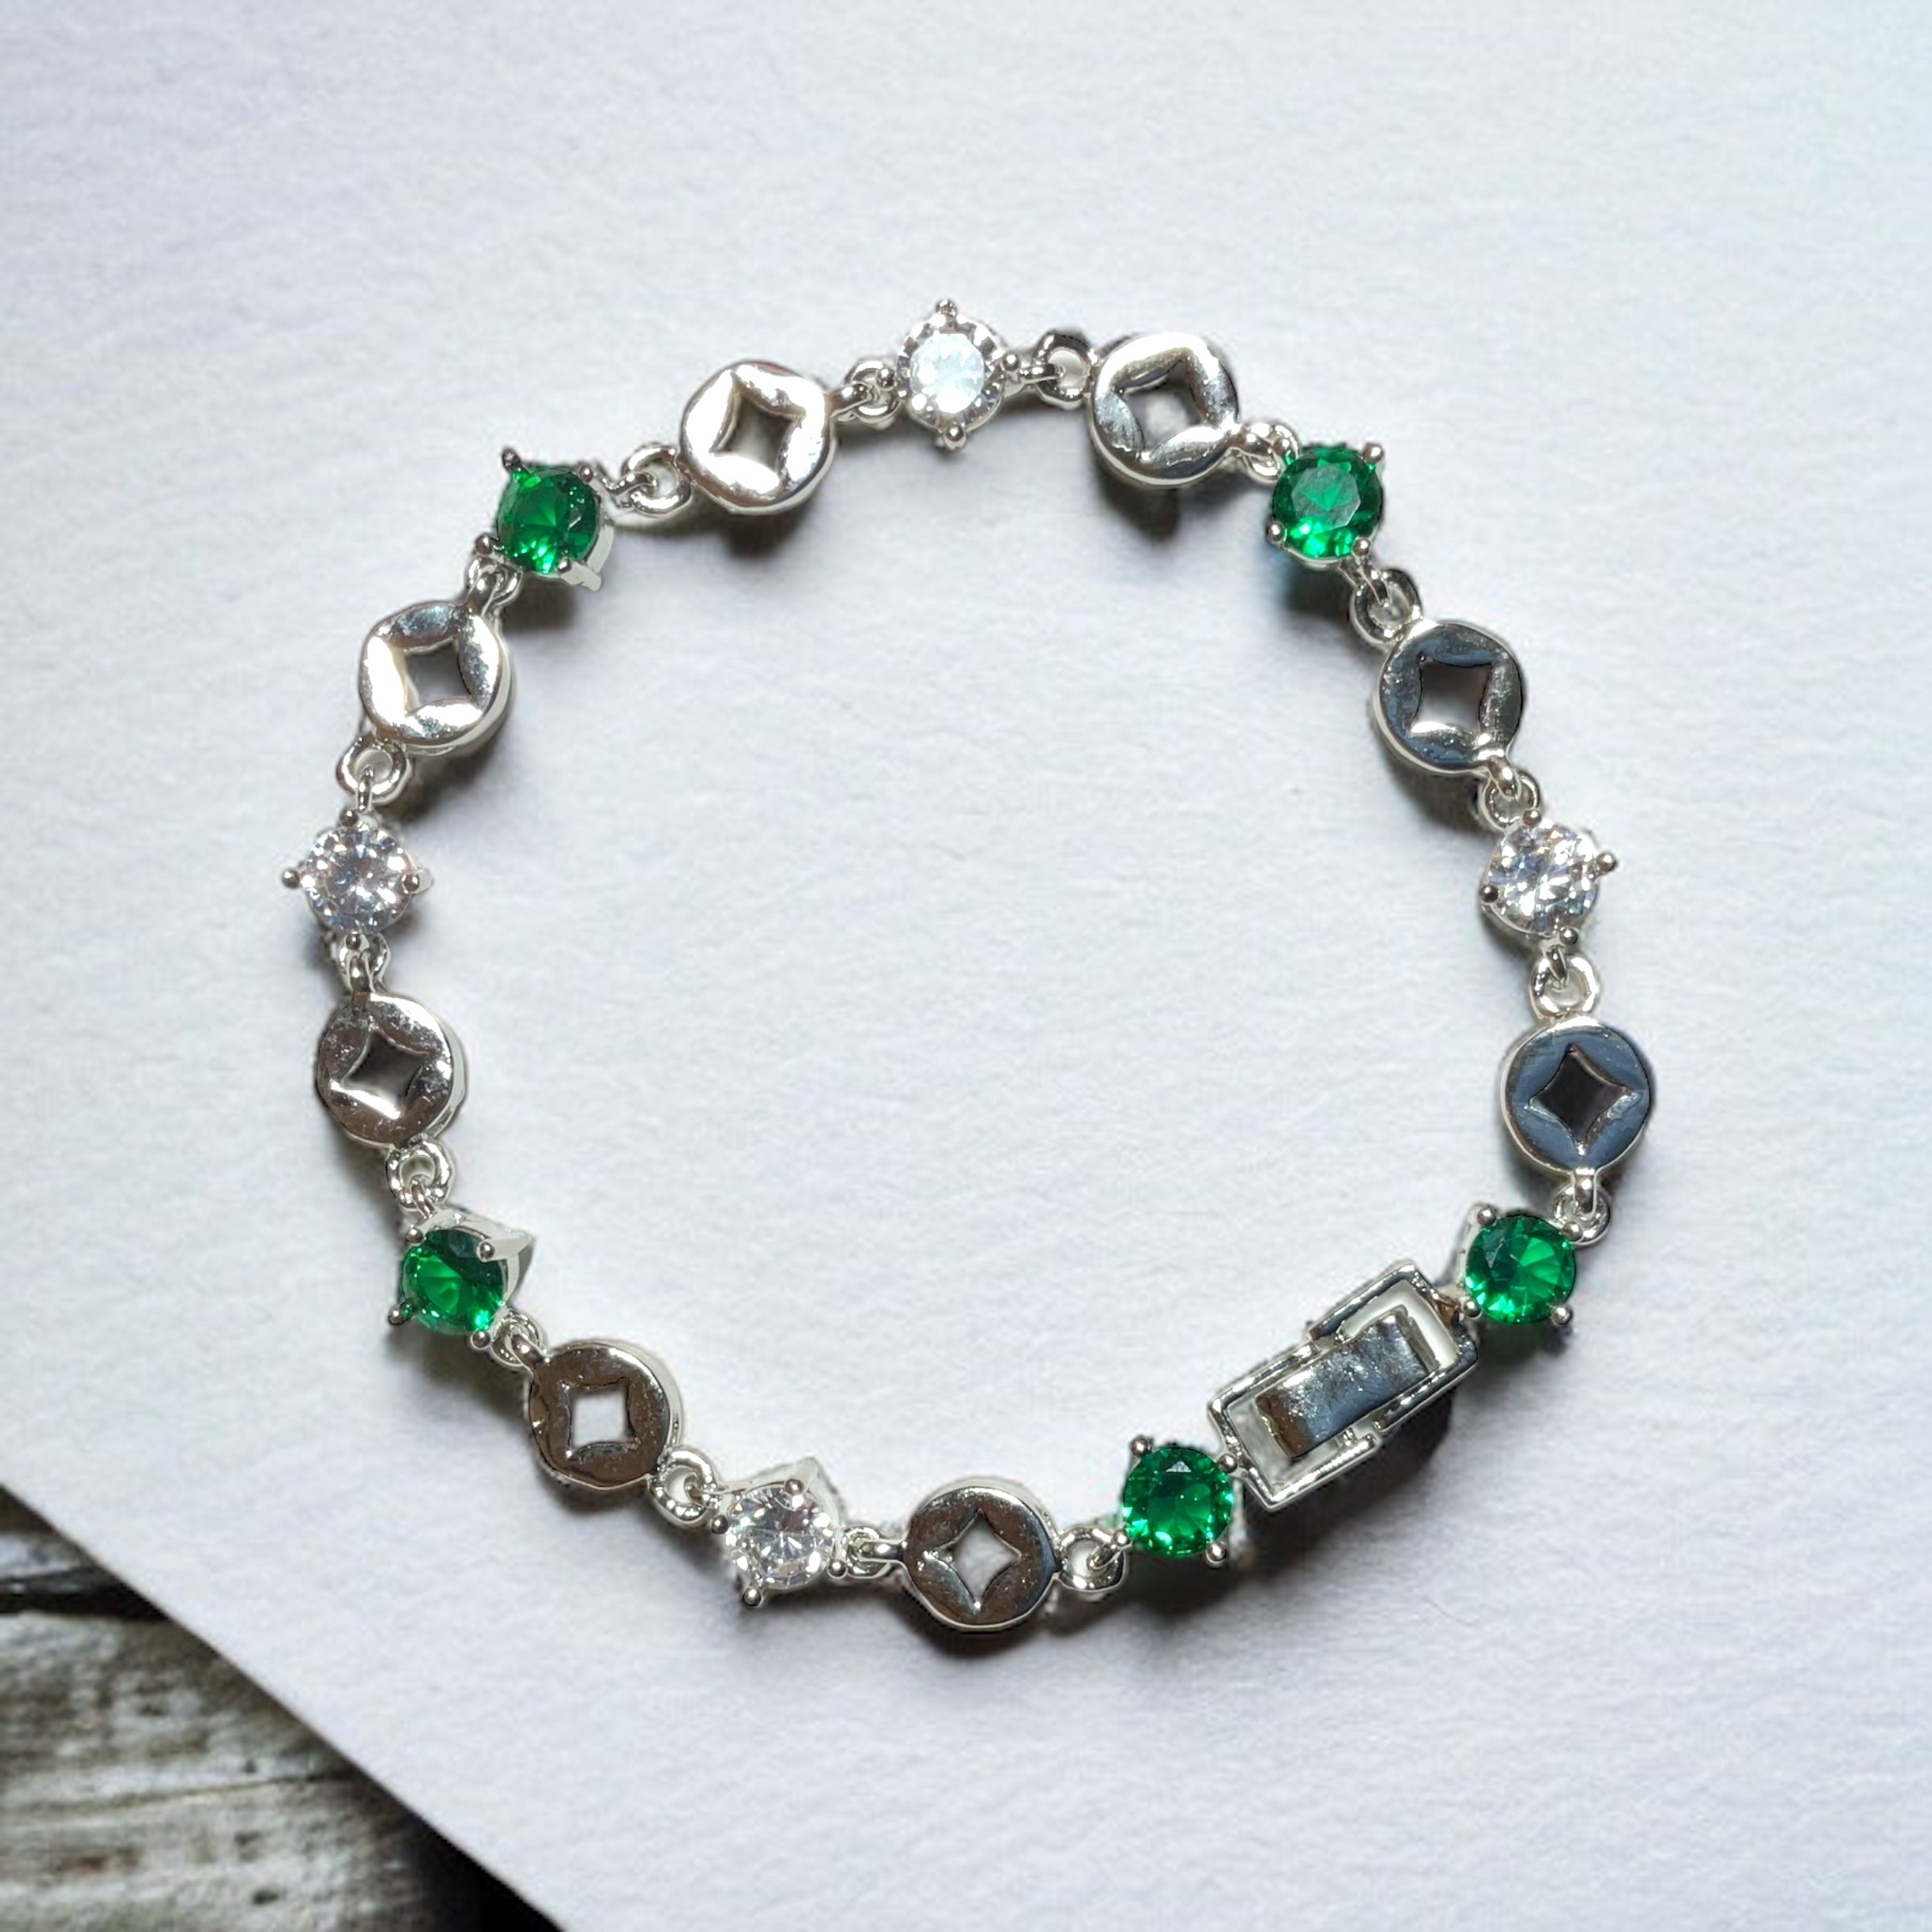 a silver bracelet with green and white stones